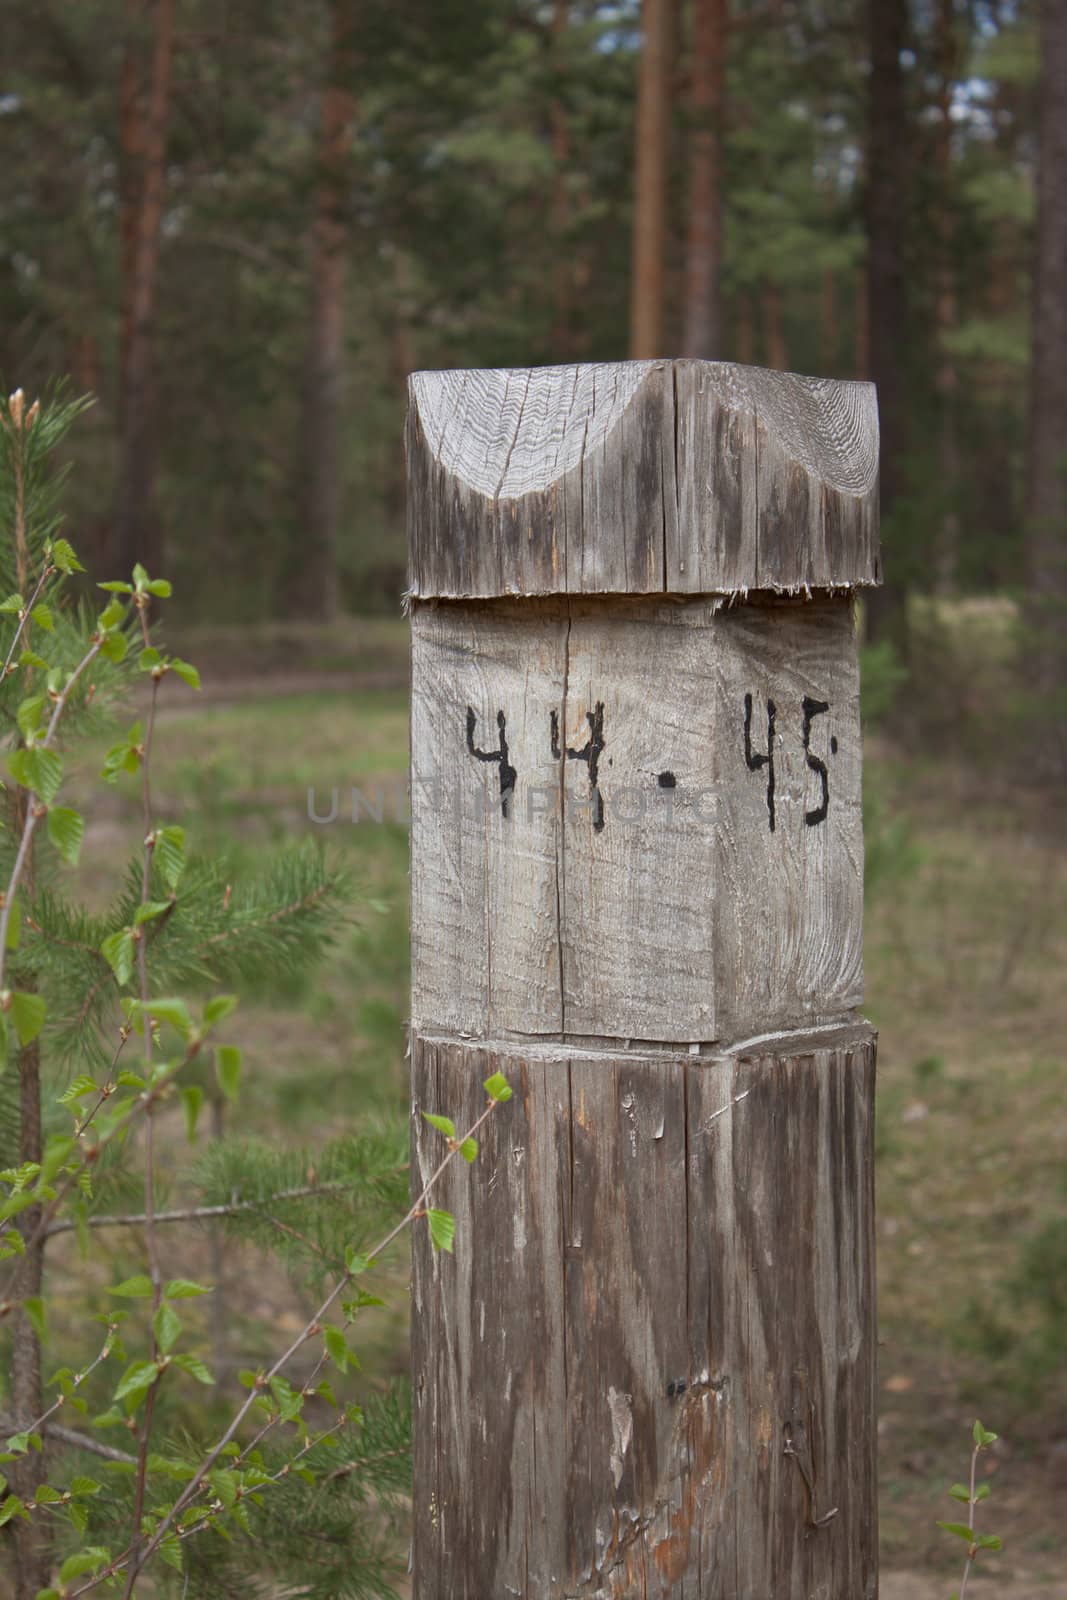 A pillar at the intersection of firebreaks in the forest